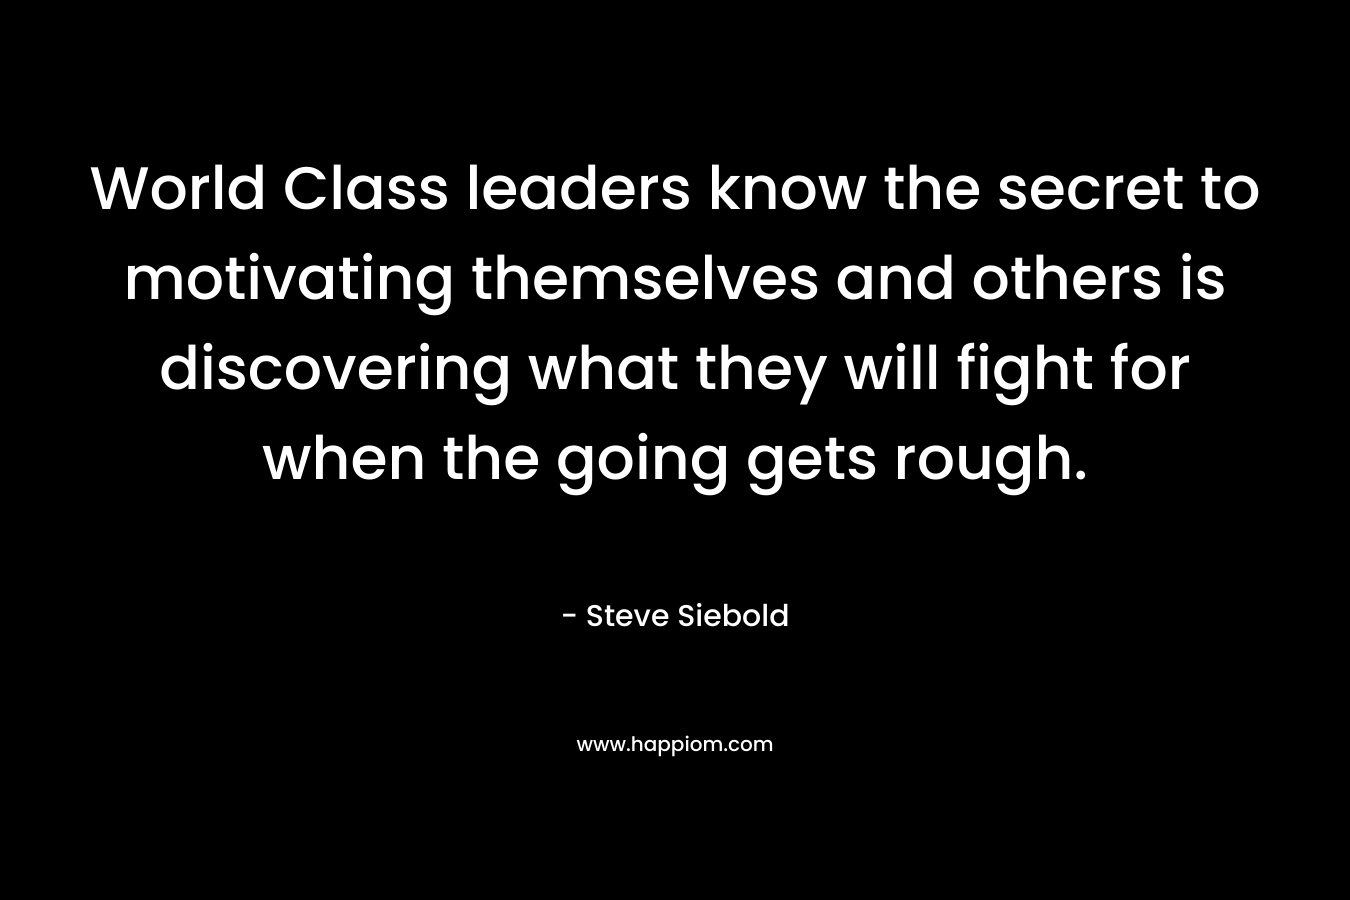 World Class leaders know the secret to motivating themselves and others is discovering what they will fight for when the going gets rough. – Steve Siebold